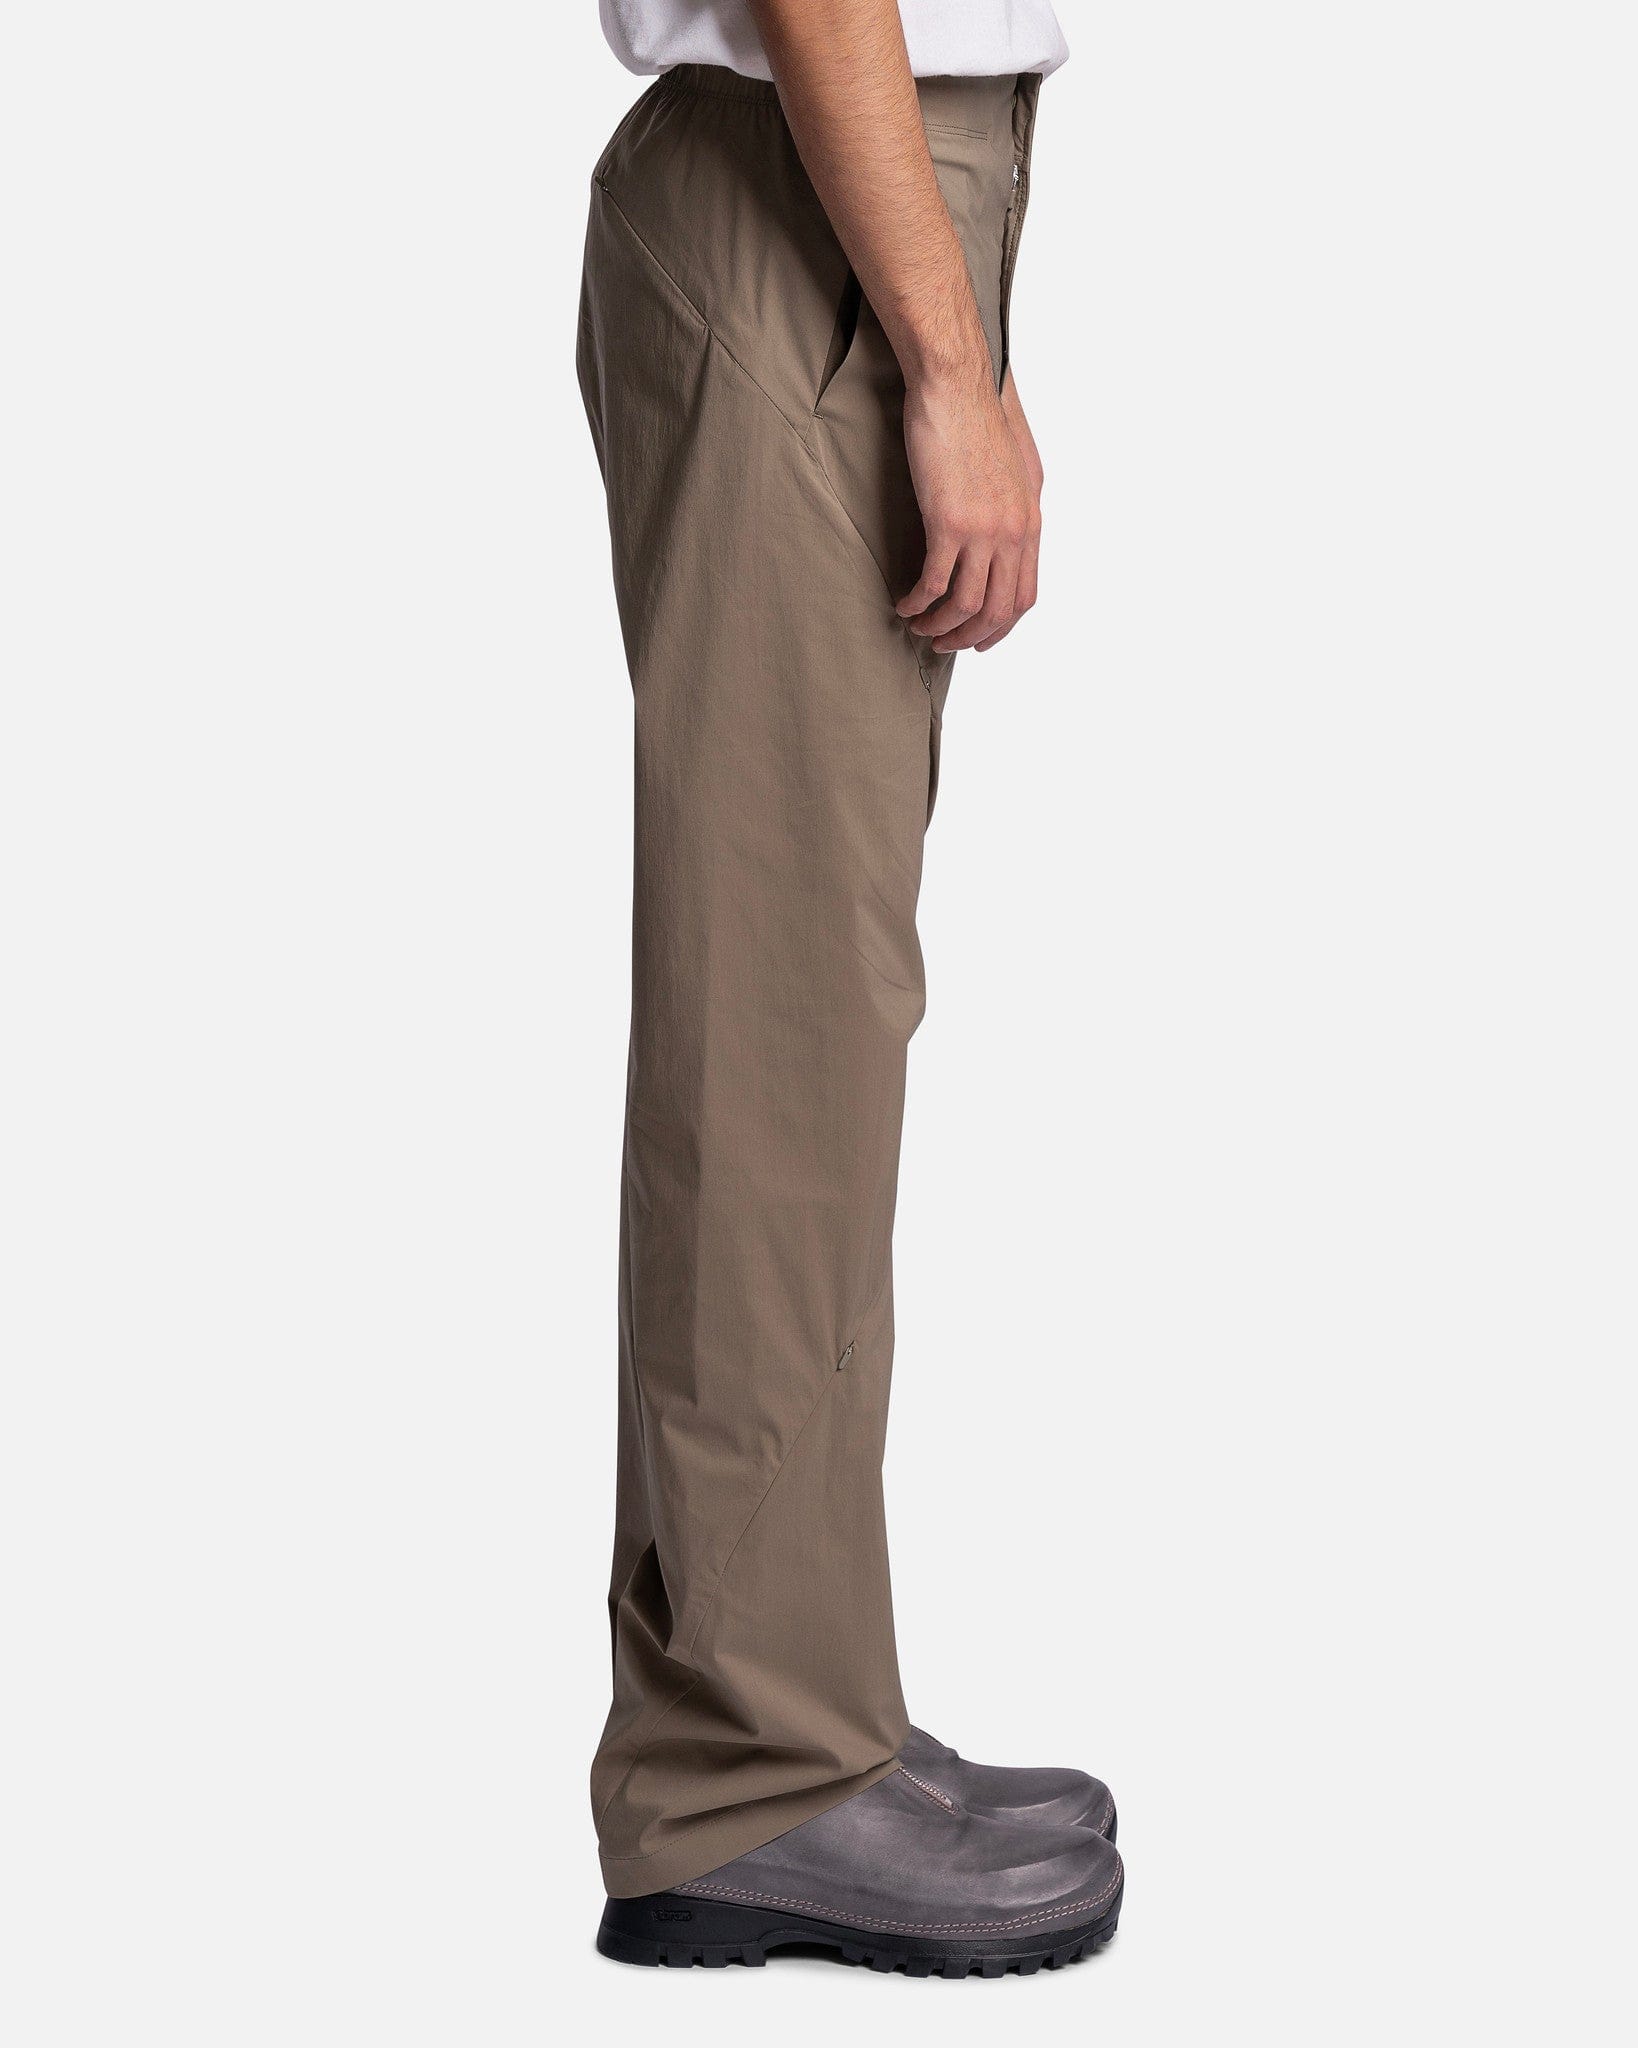 POST ARCHIVE FACTION 3.0 TROUSER RIGHT-